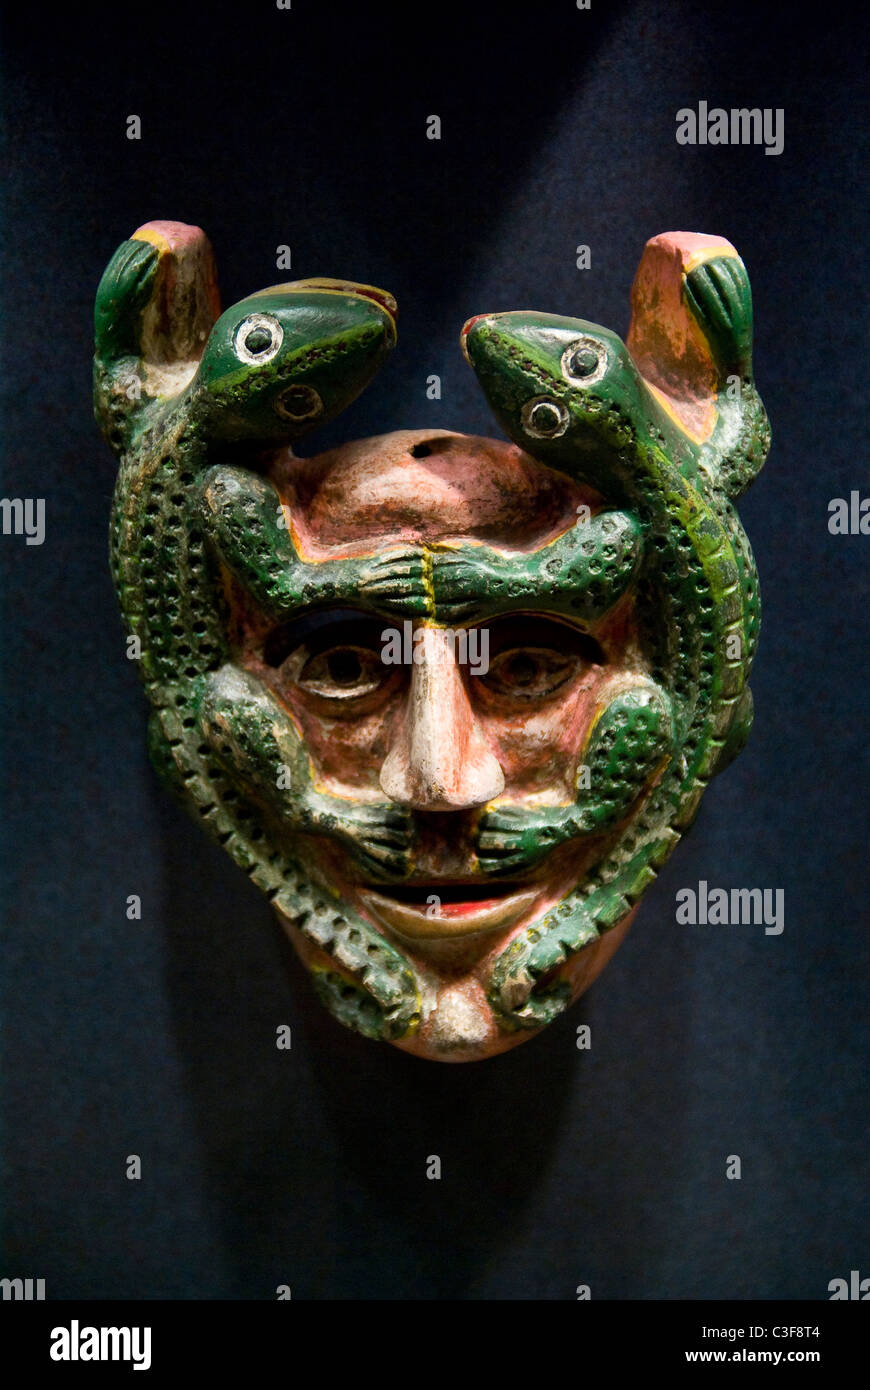 Mexico.Mexico Stadt. Nationales Museum der Anthropology.Nahuatl Kultur. Traditionelle Maske. Stockfoto